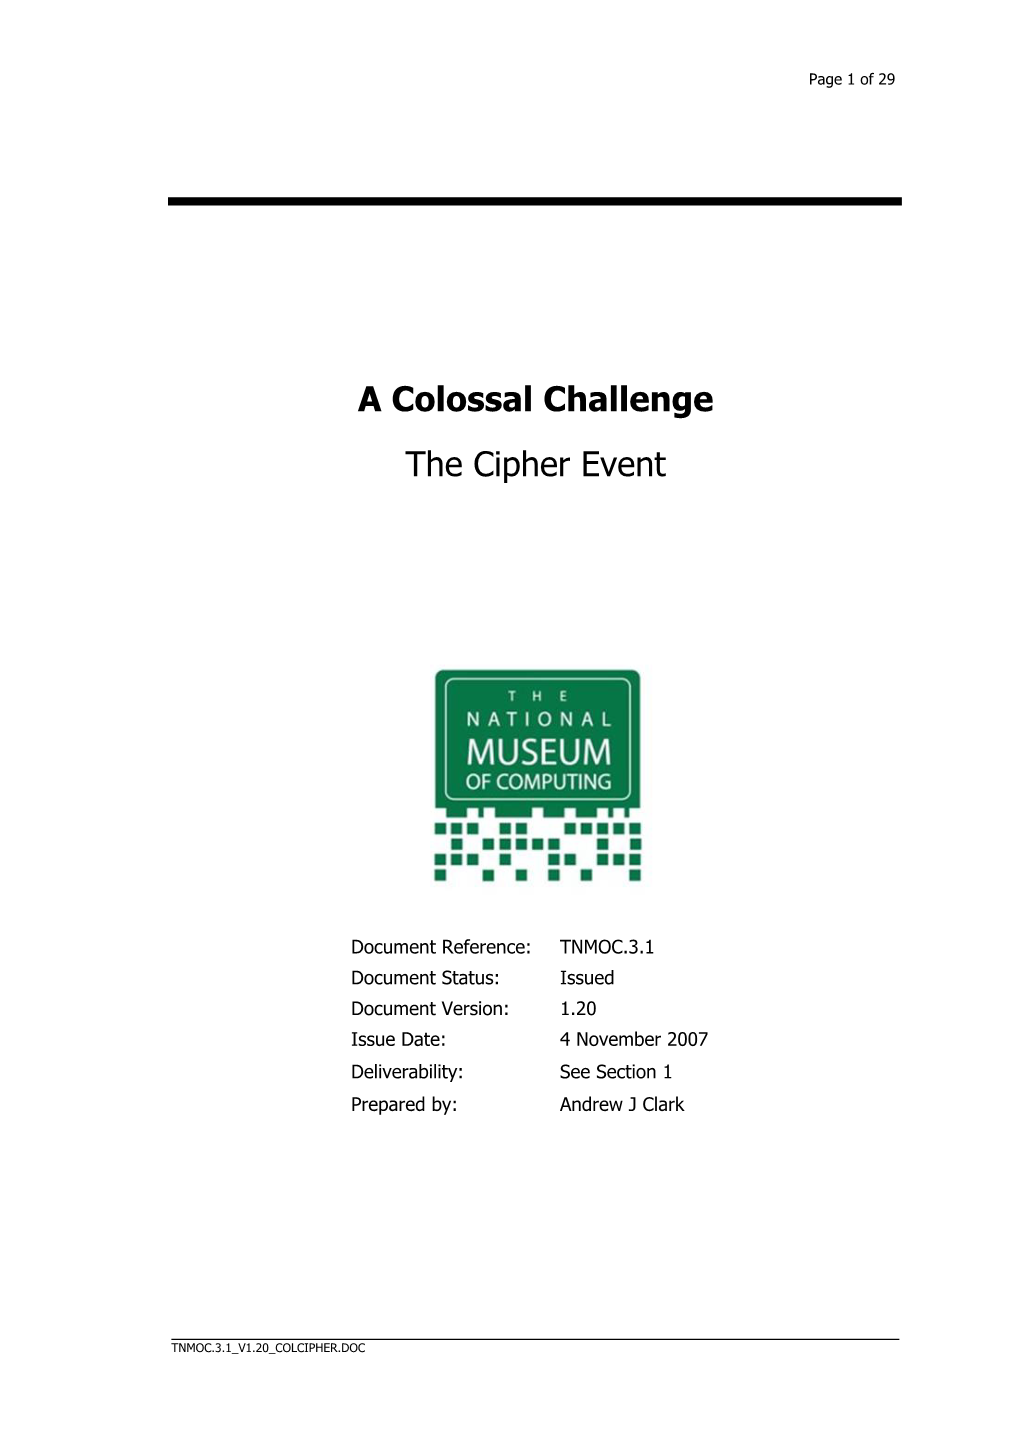 A Colossal Challenge the Cipher Event